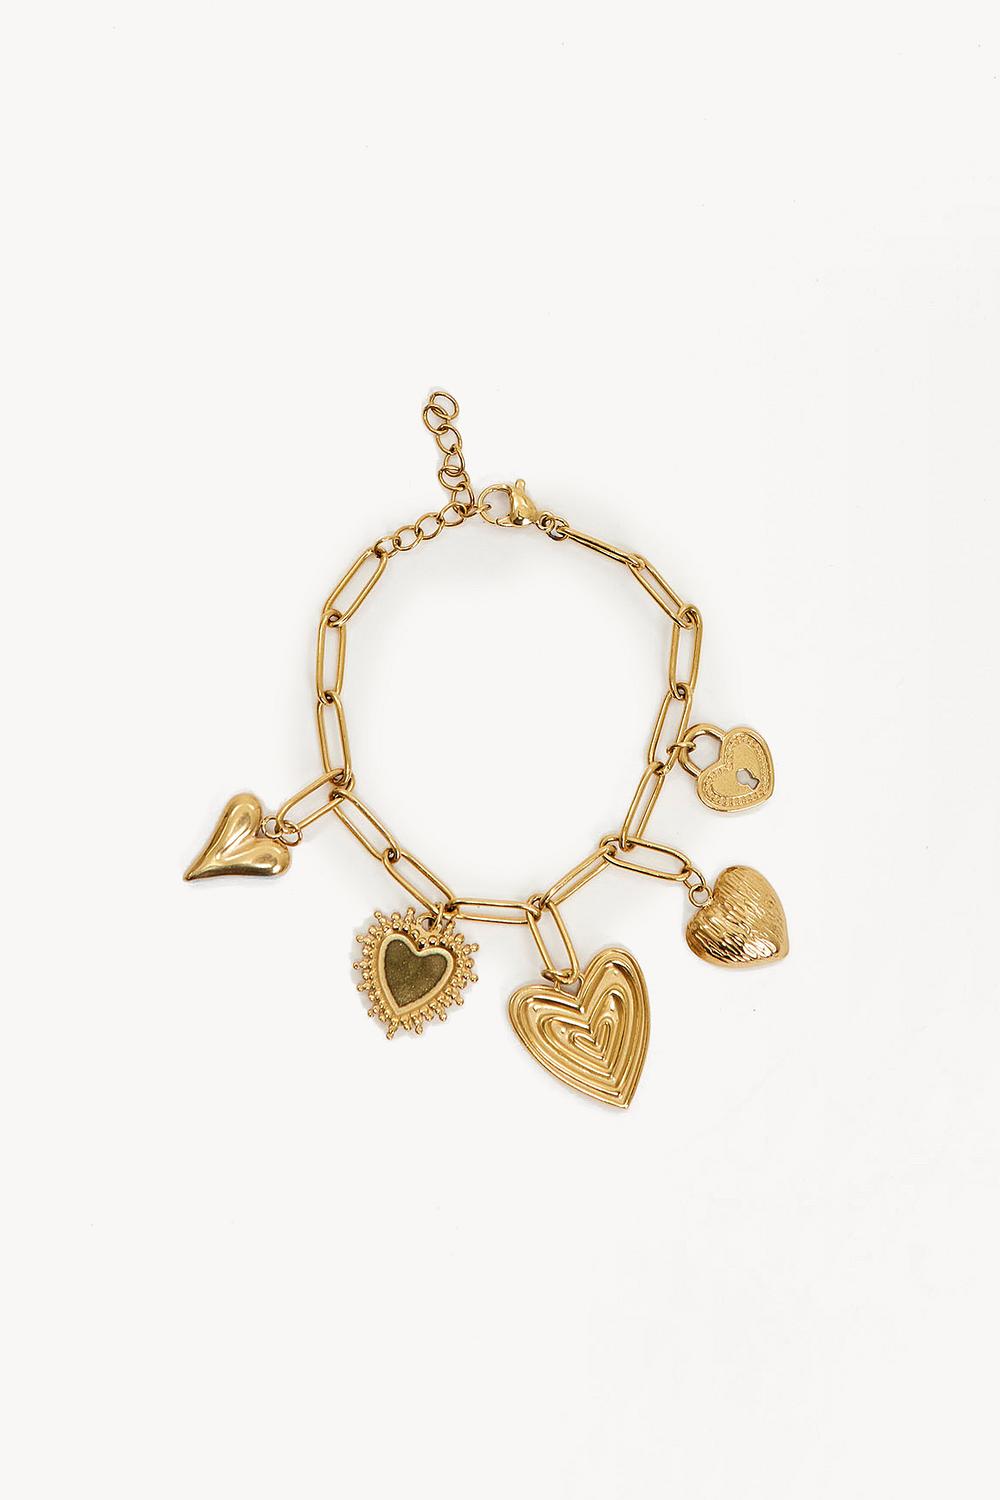 Golden bracelet with charms